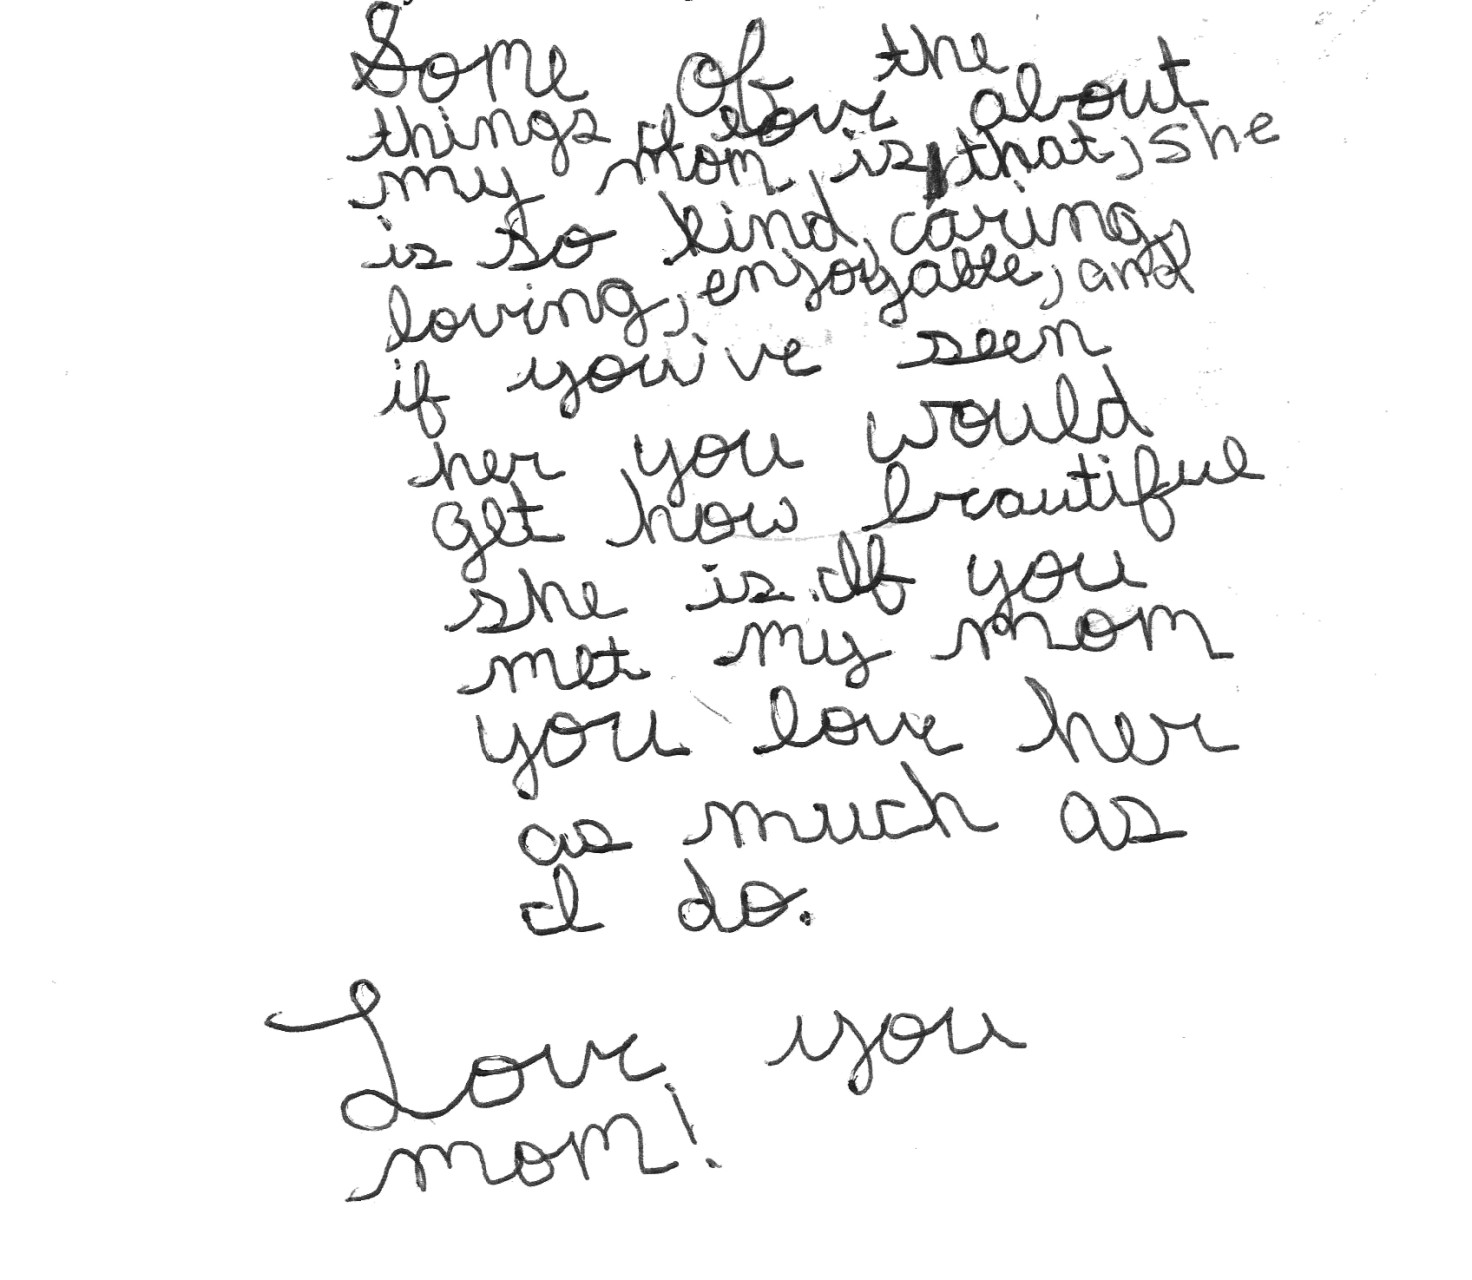 Letter to Mom from boy